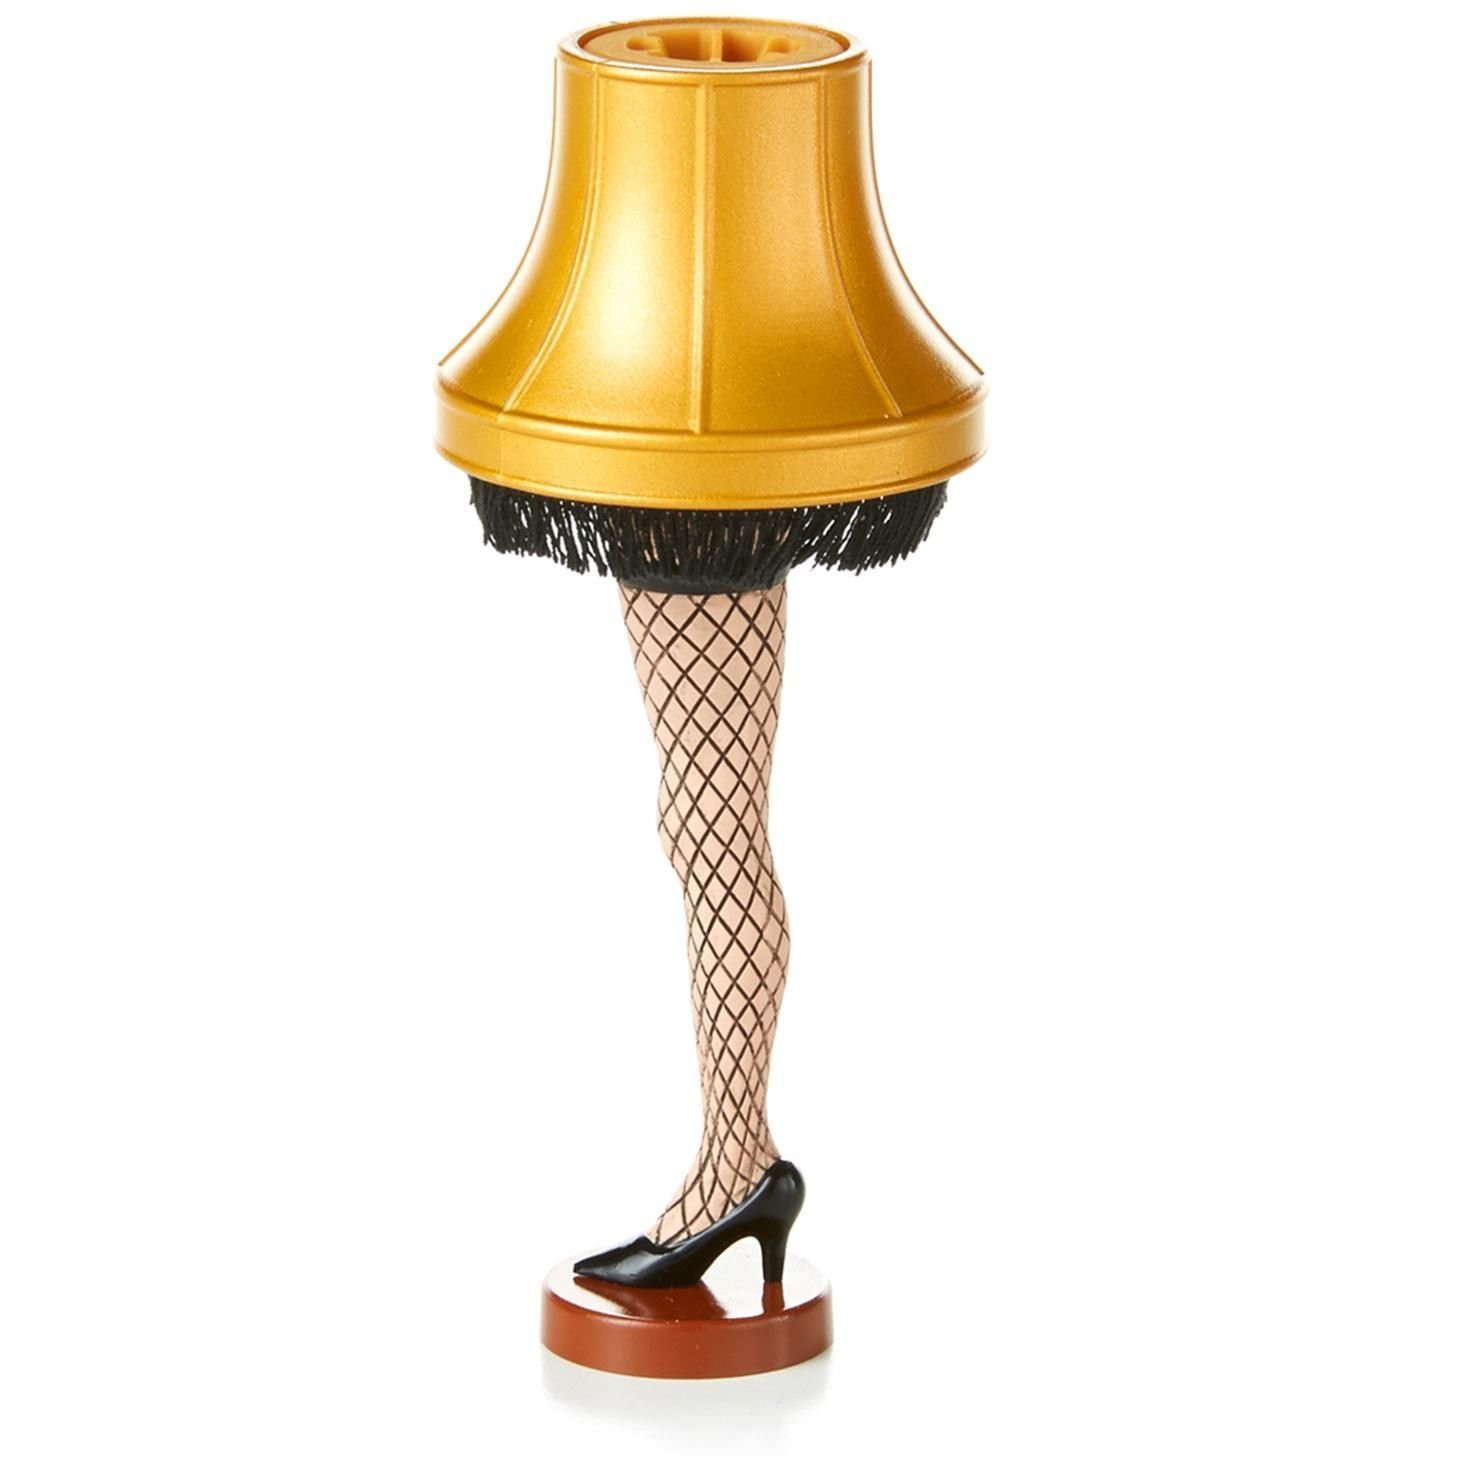 Christmas Story Leg Lamp Images
 15 Last Minute Gifts for Under $20